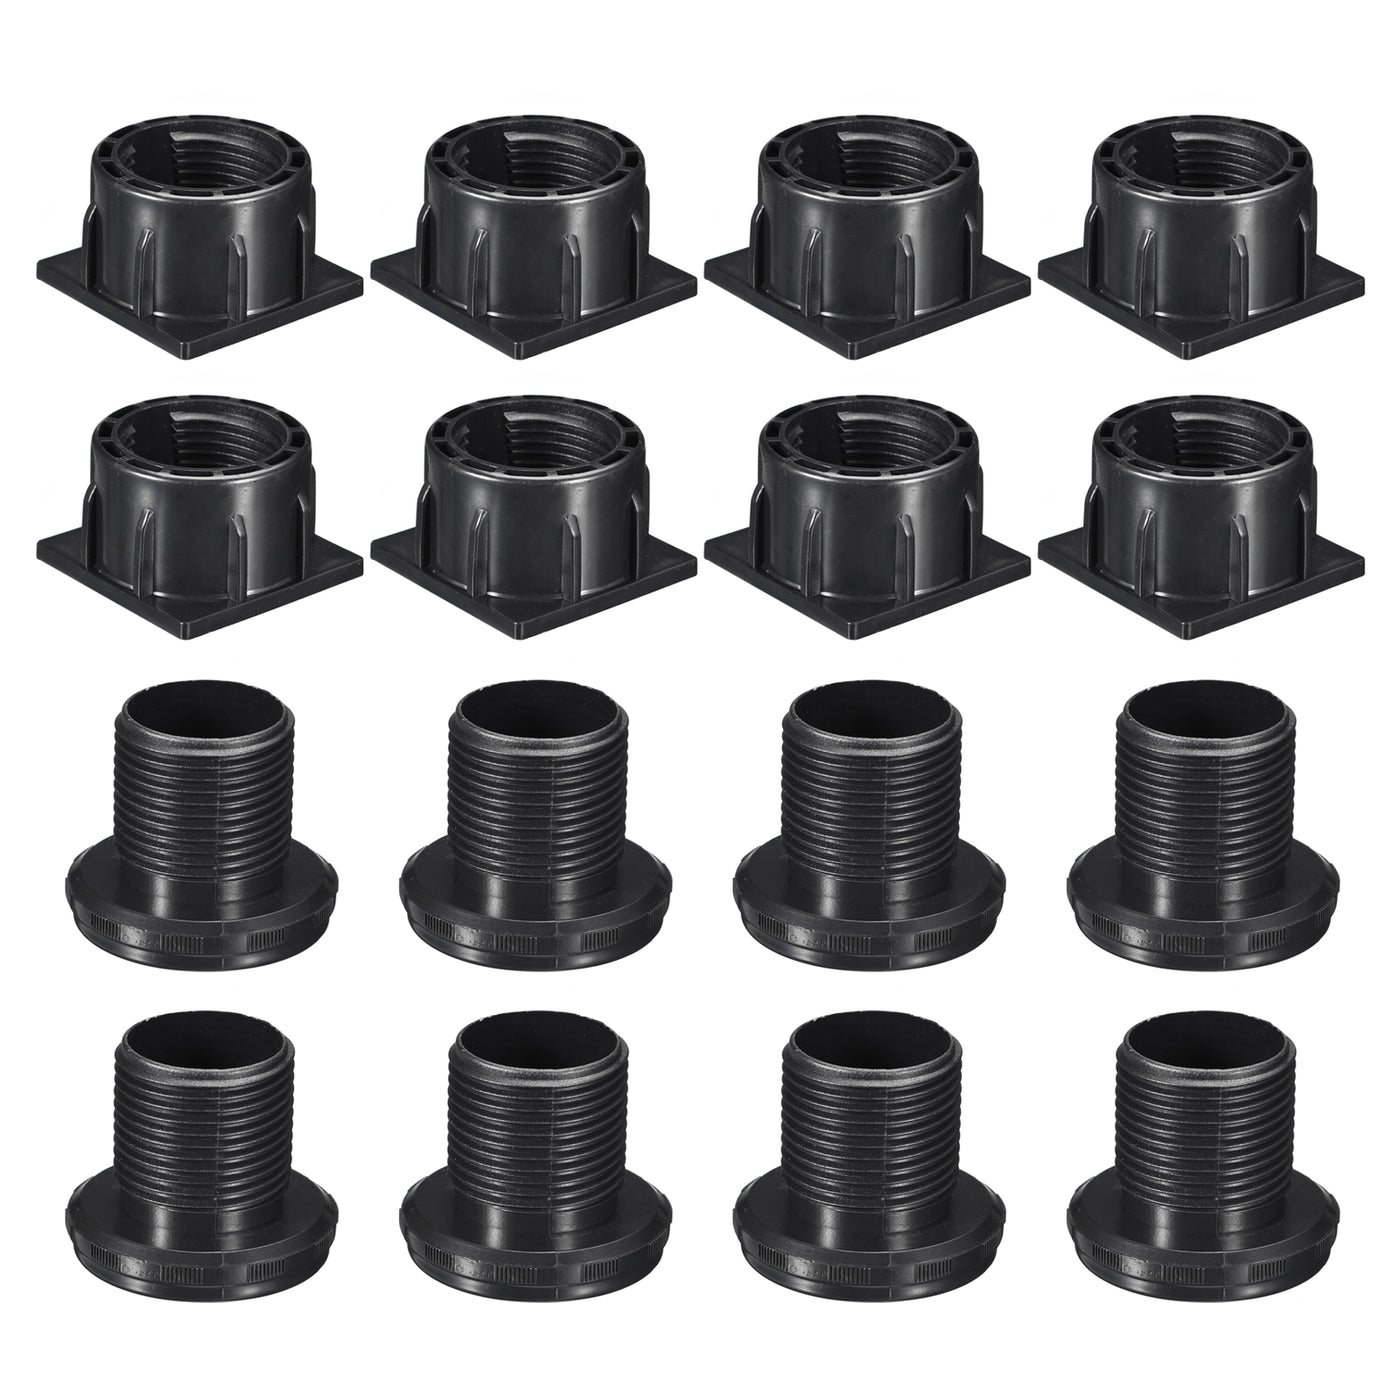 uxcell Uxcell 8Pcs Inserts for Square Tubes with Leveling Feet, for 50x50mm Dia Square Tube